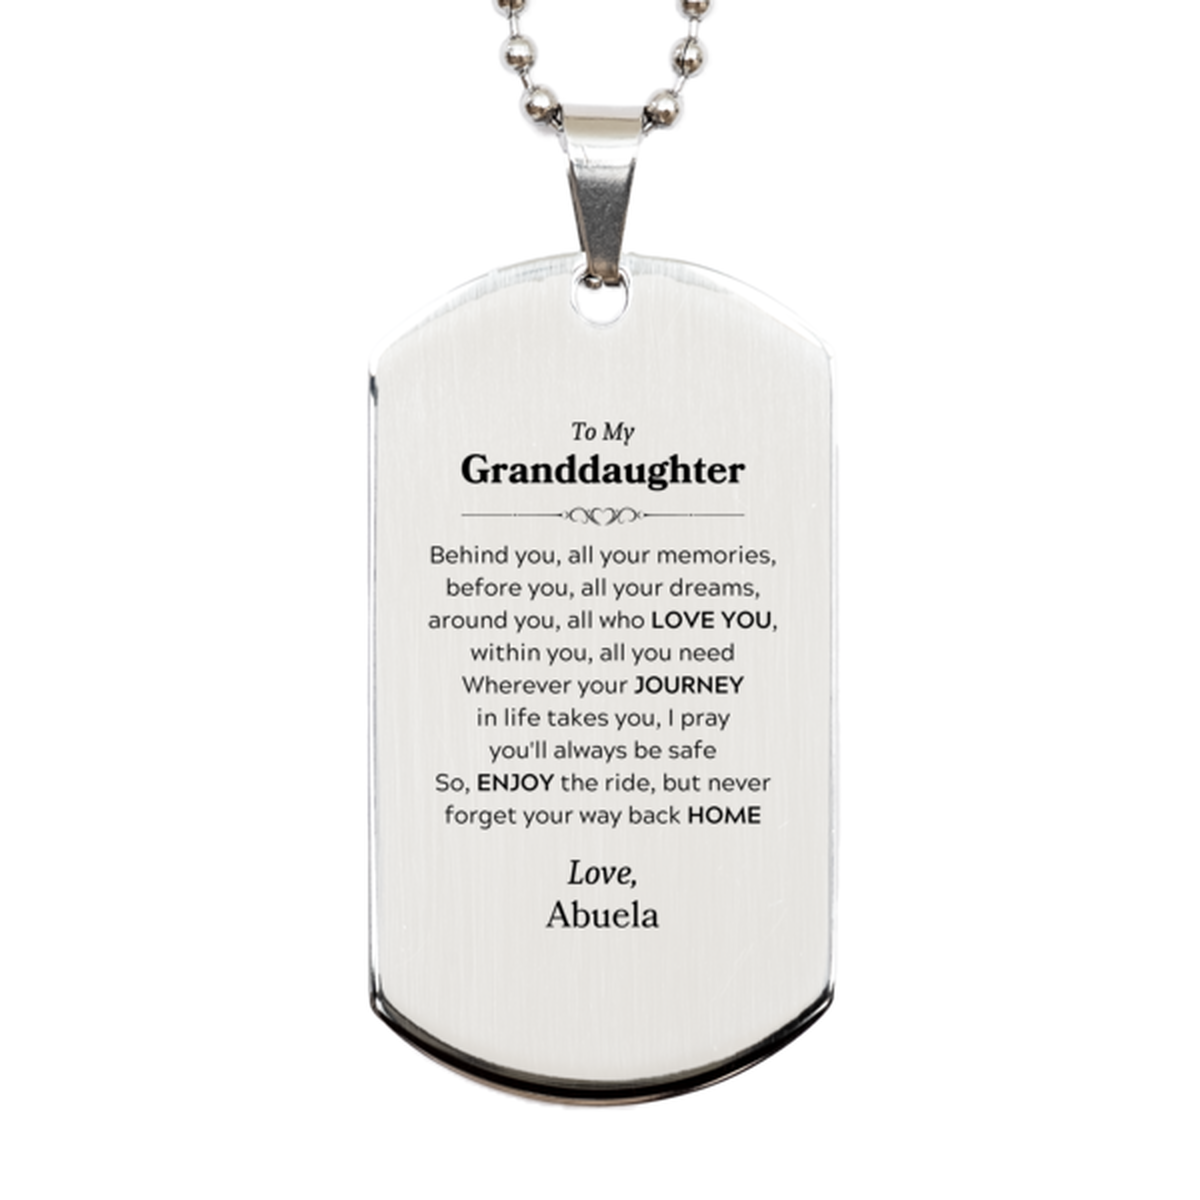 To My Granddaughter Graduation Gifts from Abuela, Granddaughter Silver Dog Tag Christmas Birthday Gifts for Granddaughter Behind you, all your memories, before you, all your dreams. Love, Abuela